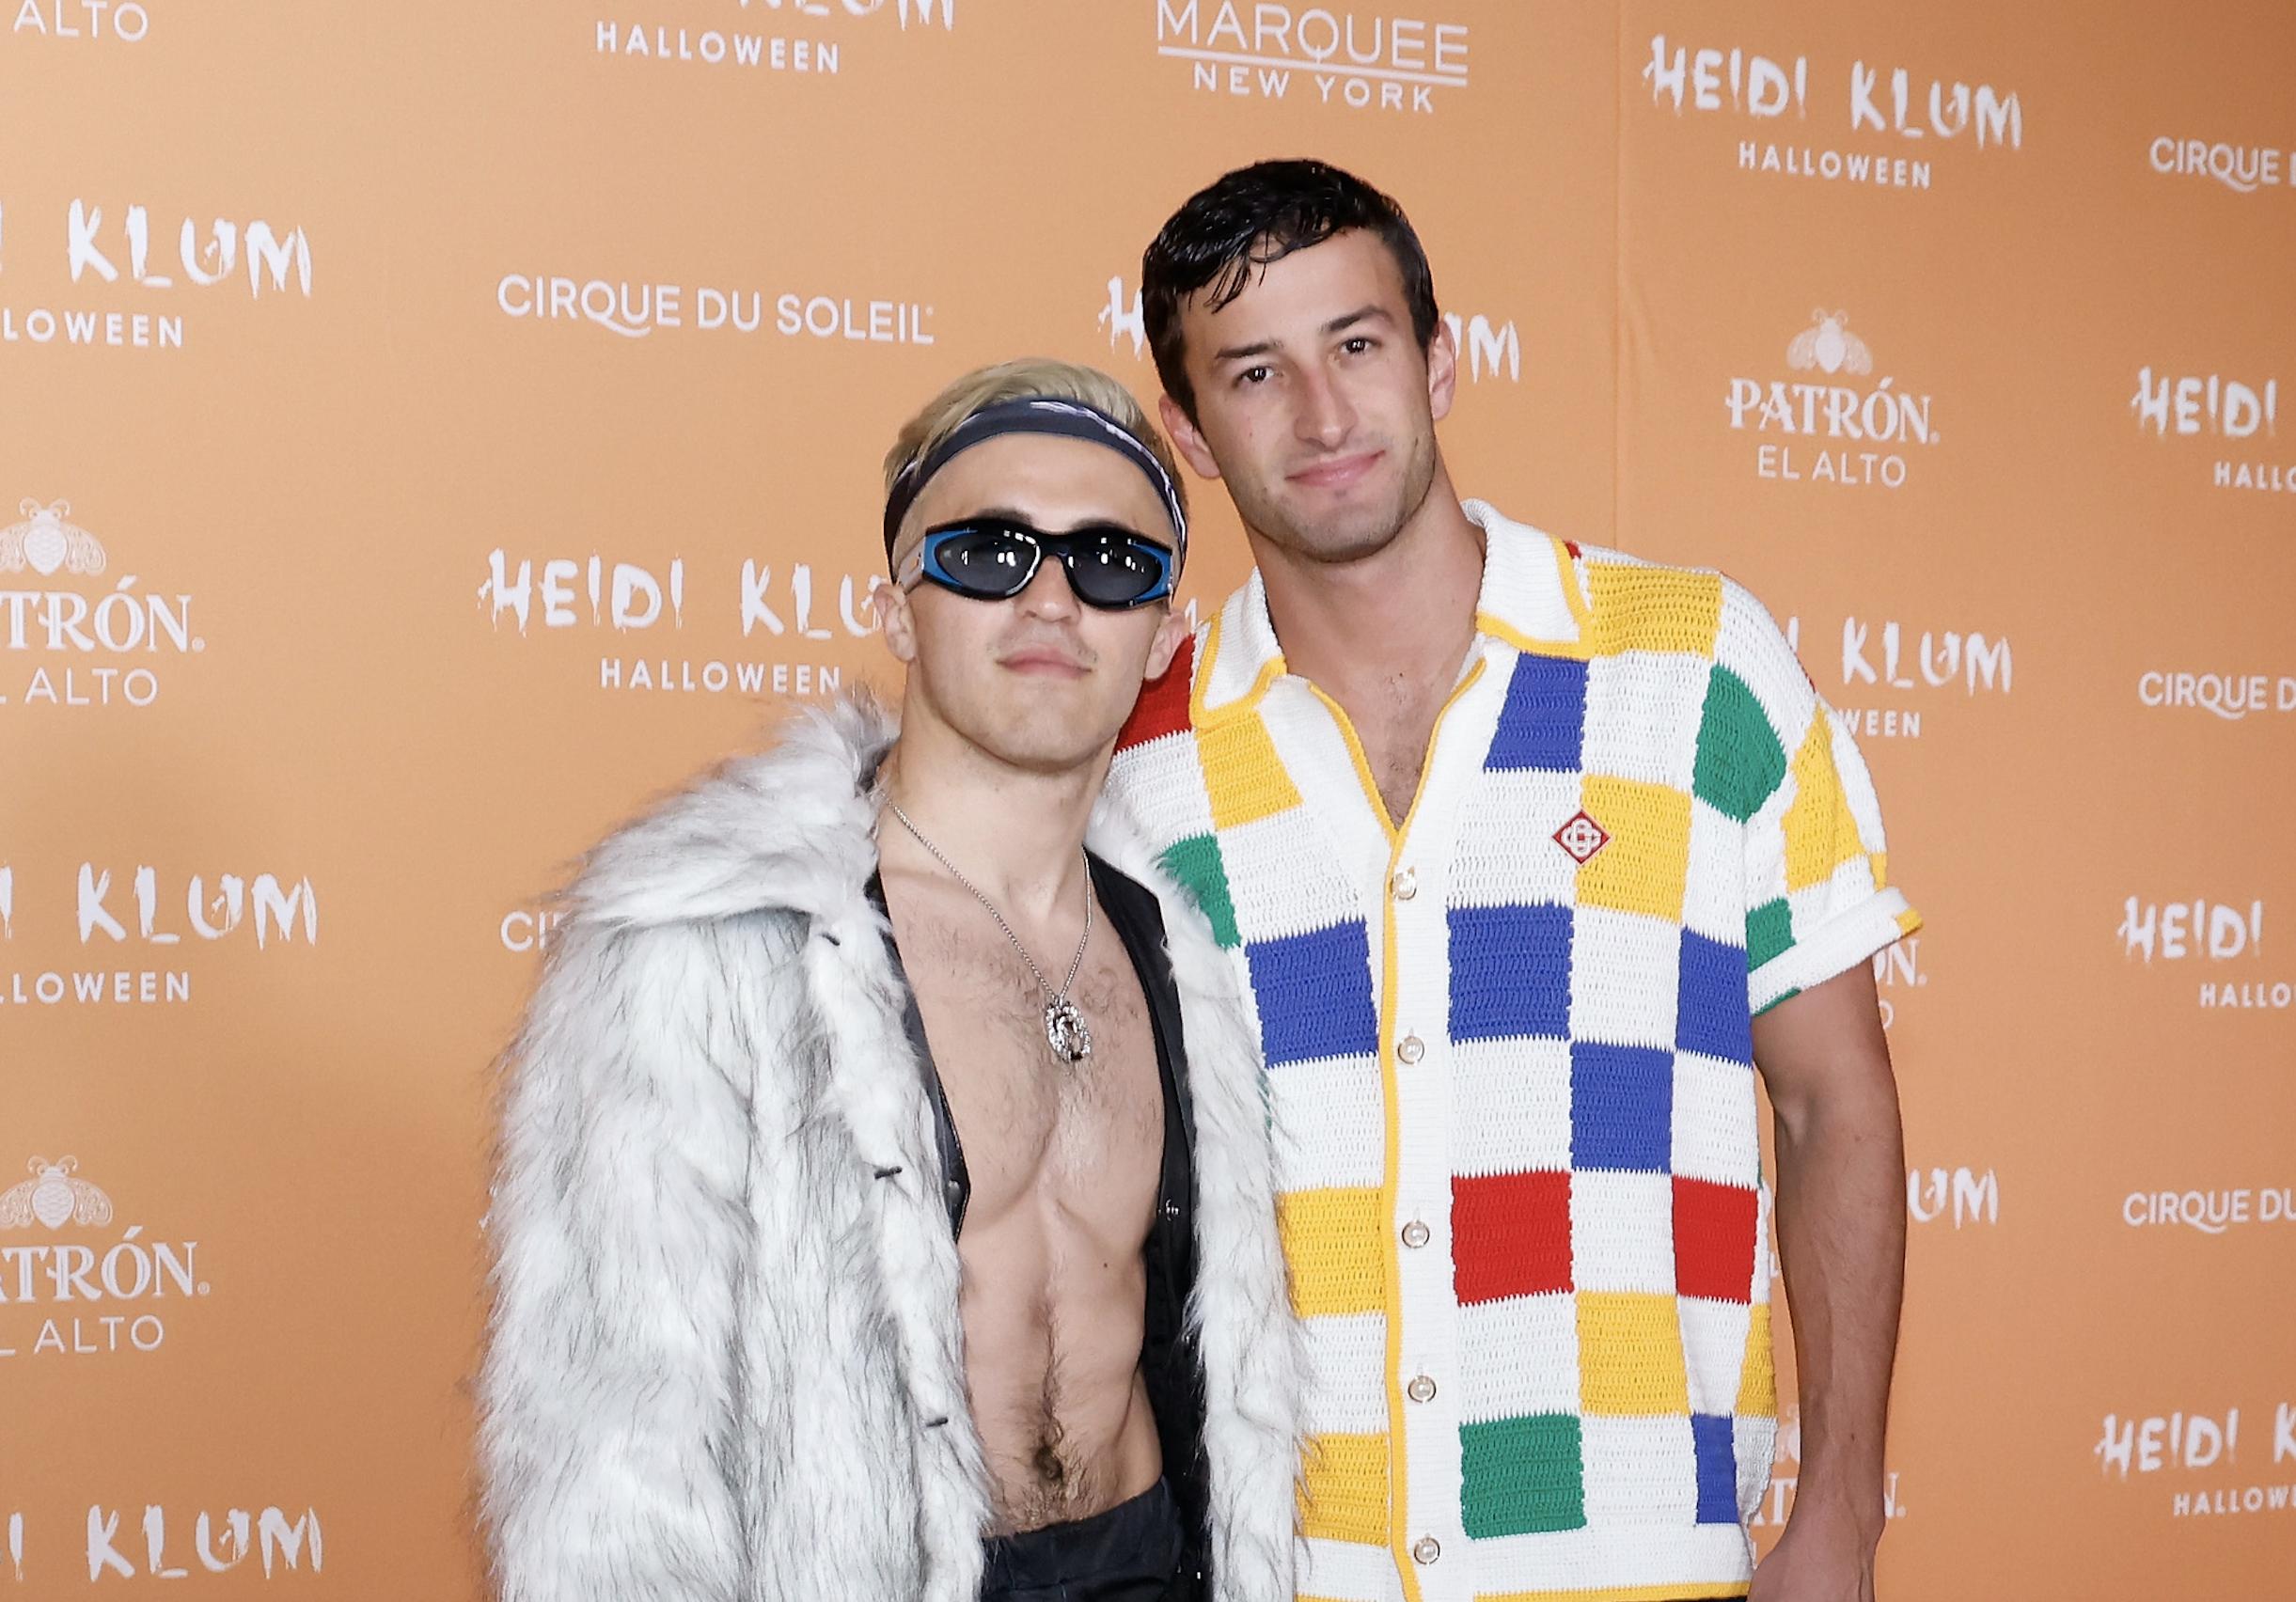 Chris Olsen, wearing a furry coat open to reveal a ripped chest, a necklace, black sunglasses, and a bandana wrapped around his bleached hair stands next to Patrick Johnson. Johnson smiles softly in a red, blue, yellow, and green checkerboard white t-shirt like Allan from